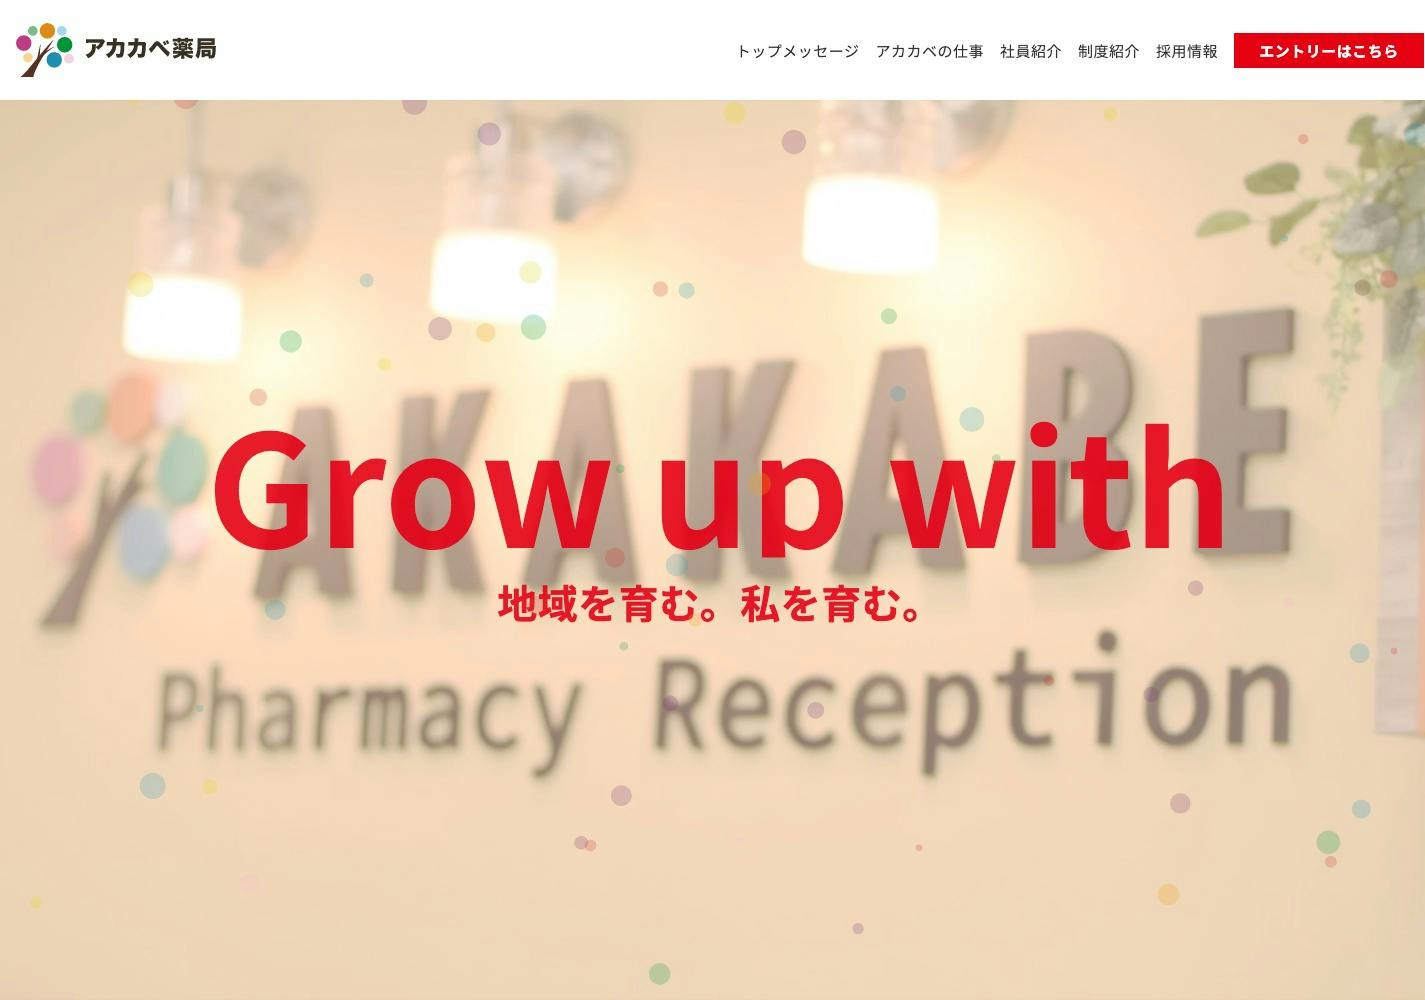 Cover Image for アカカベ薬局の薬剤師採用サイト